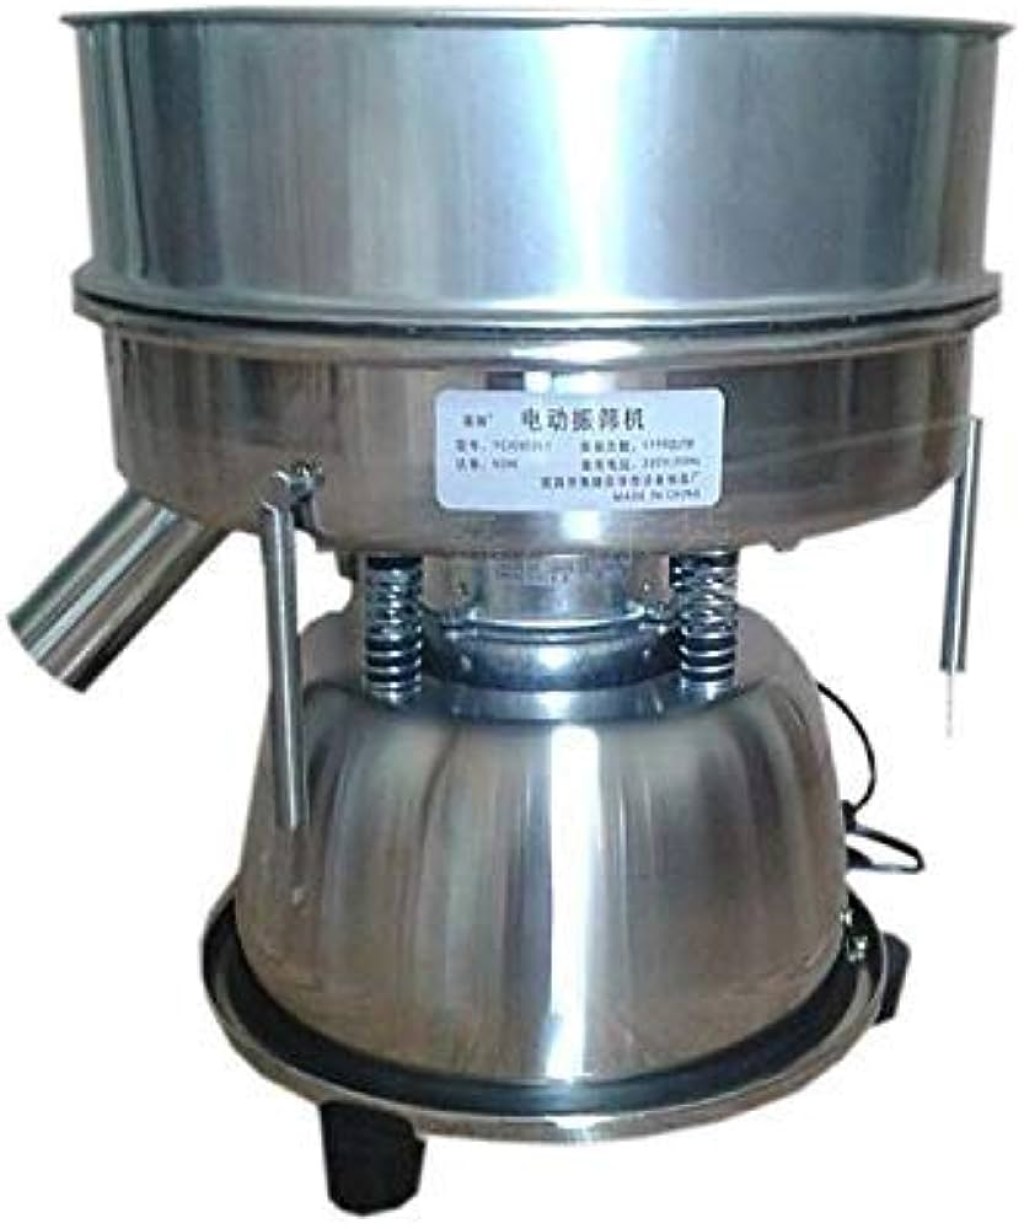 Picture of: Electric Automatic Sieve Shaker Vibrating Sieve Machine Food Strainer  Industrial Sieve Stainless Steel for Granules Powder Grain  Mesh